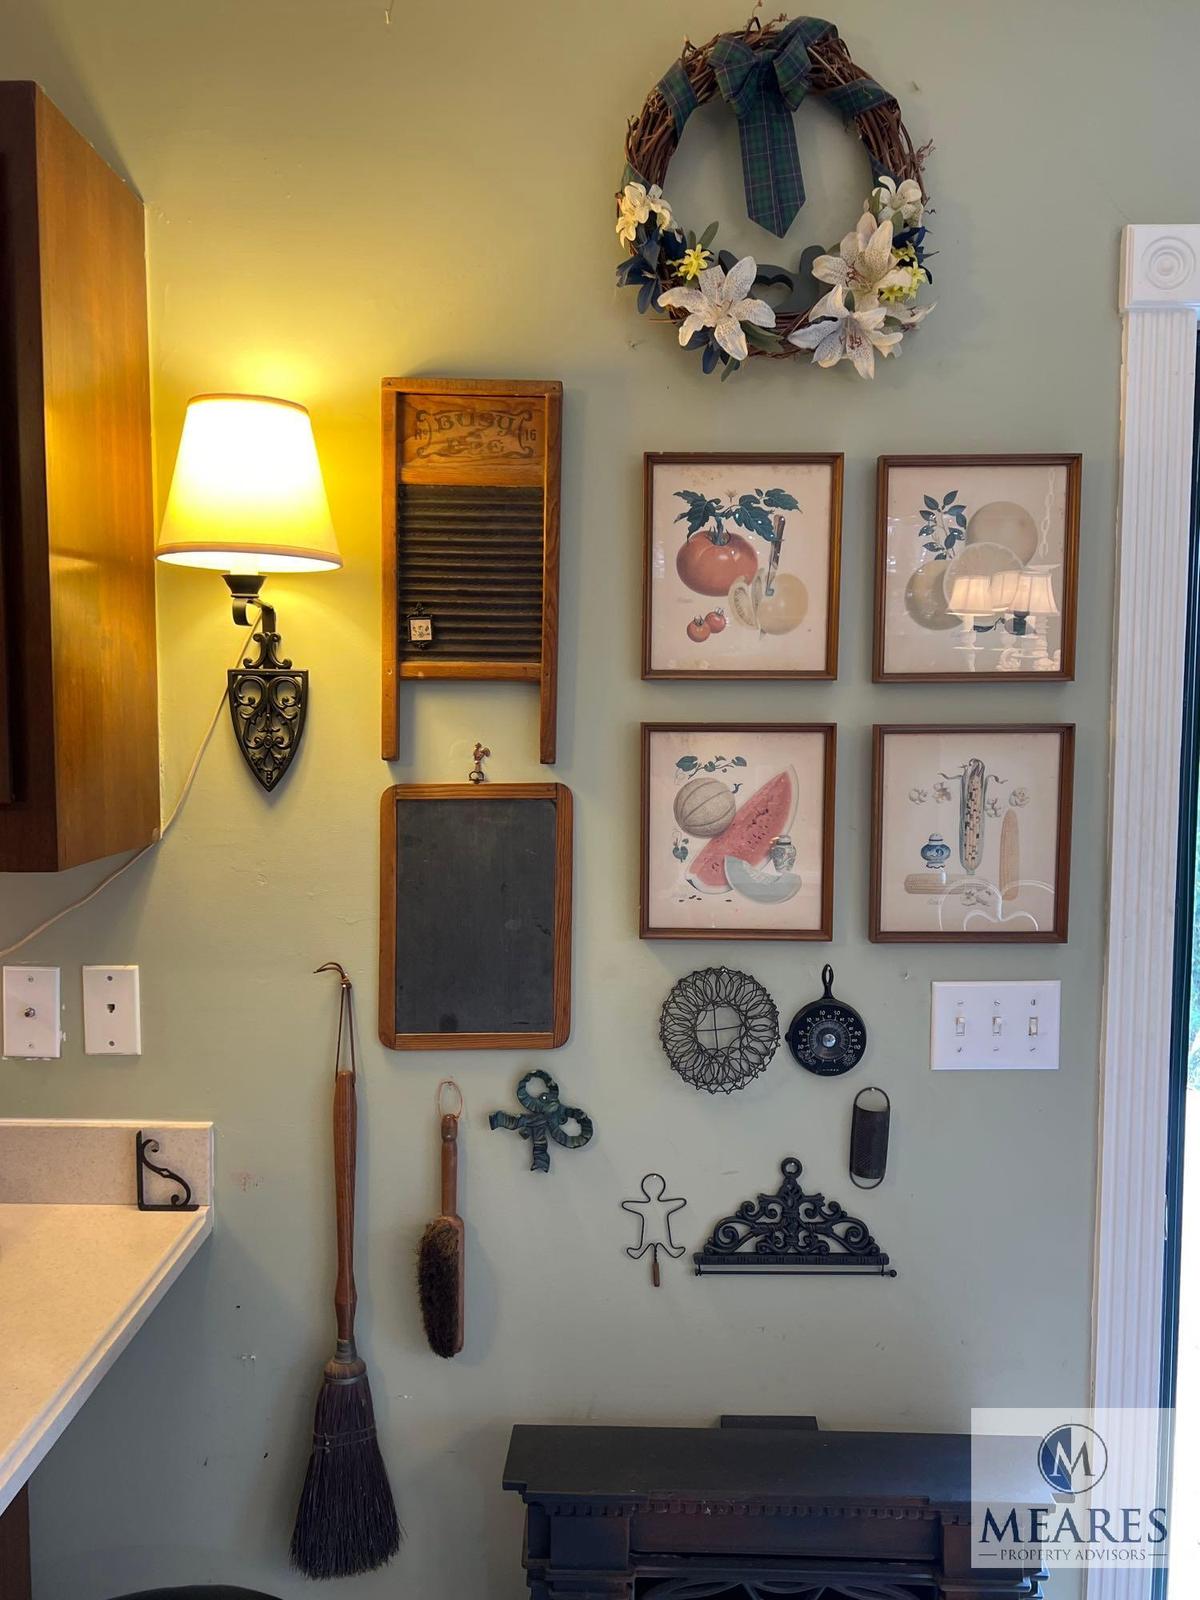 Vintage Wall Decor and Rustic Kitchen Items